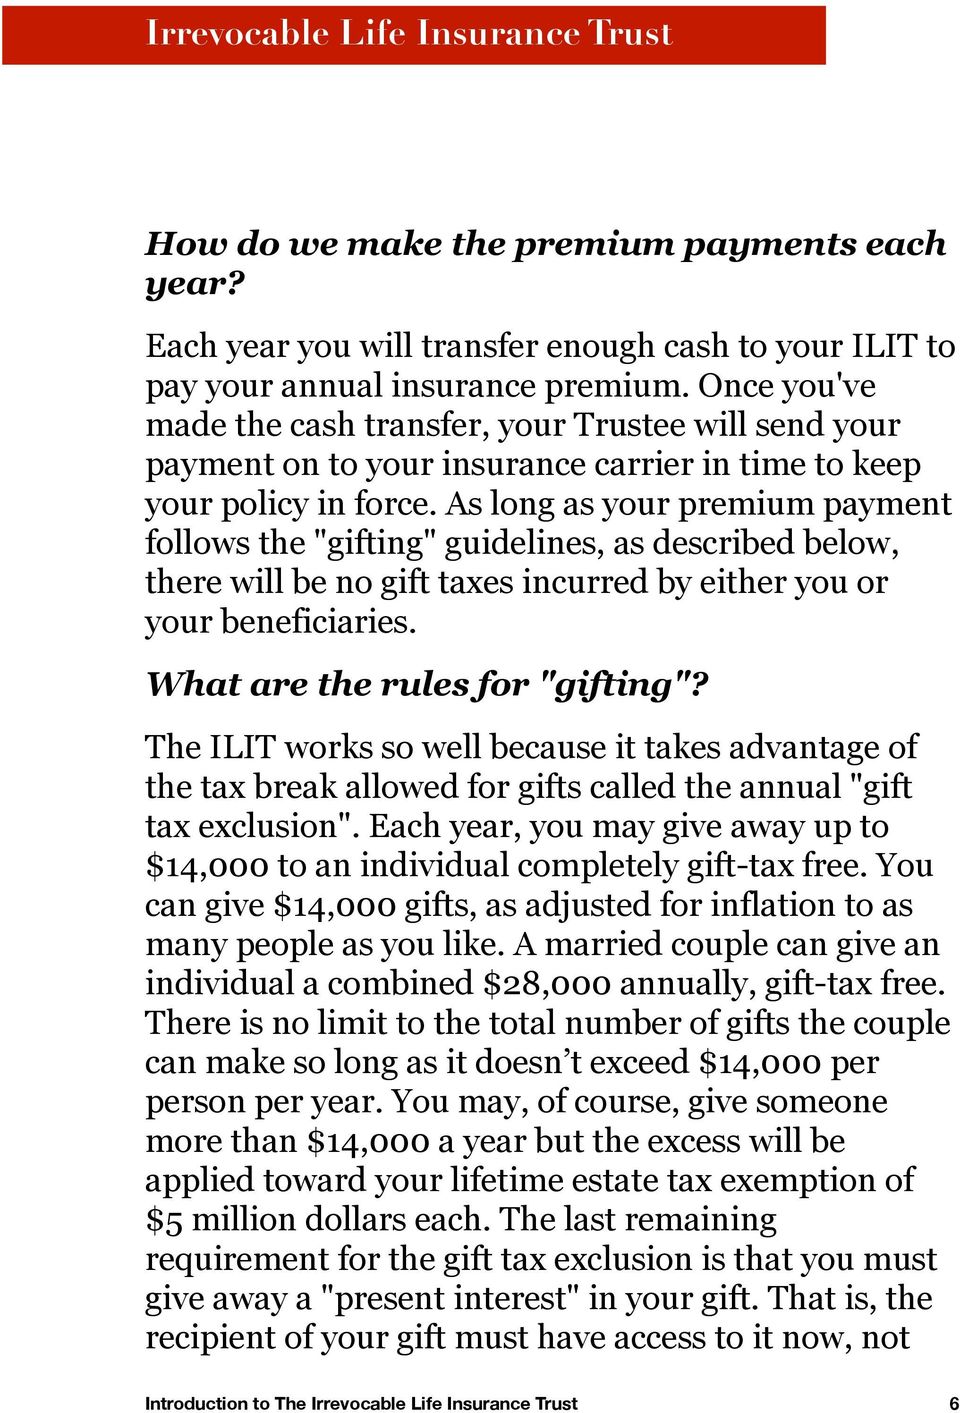 As long as your premium payment follows the "gifting" guidelines, as described below, there will be no gift taxes incurred by either you or your beneficiaries. What are the rules for "gifting"?